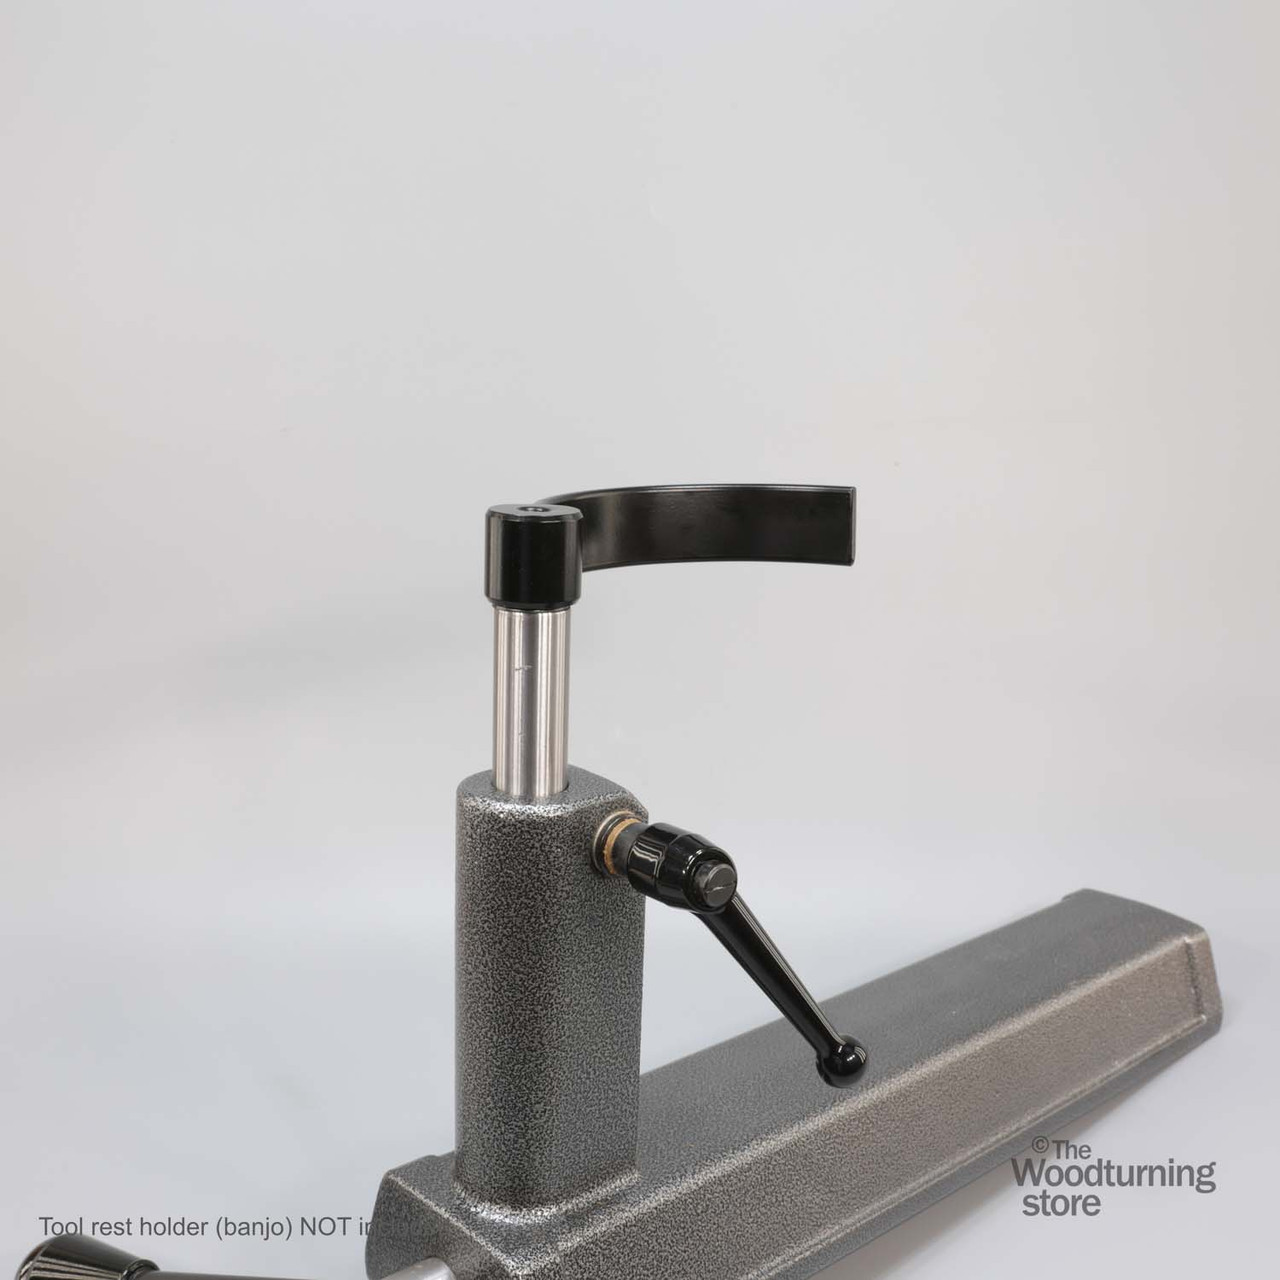 Hurricane, 5" Diameter Curved Tool Rest For Small Bowls, 3" Post Length